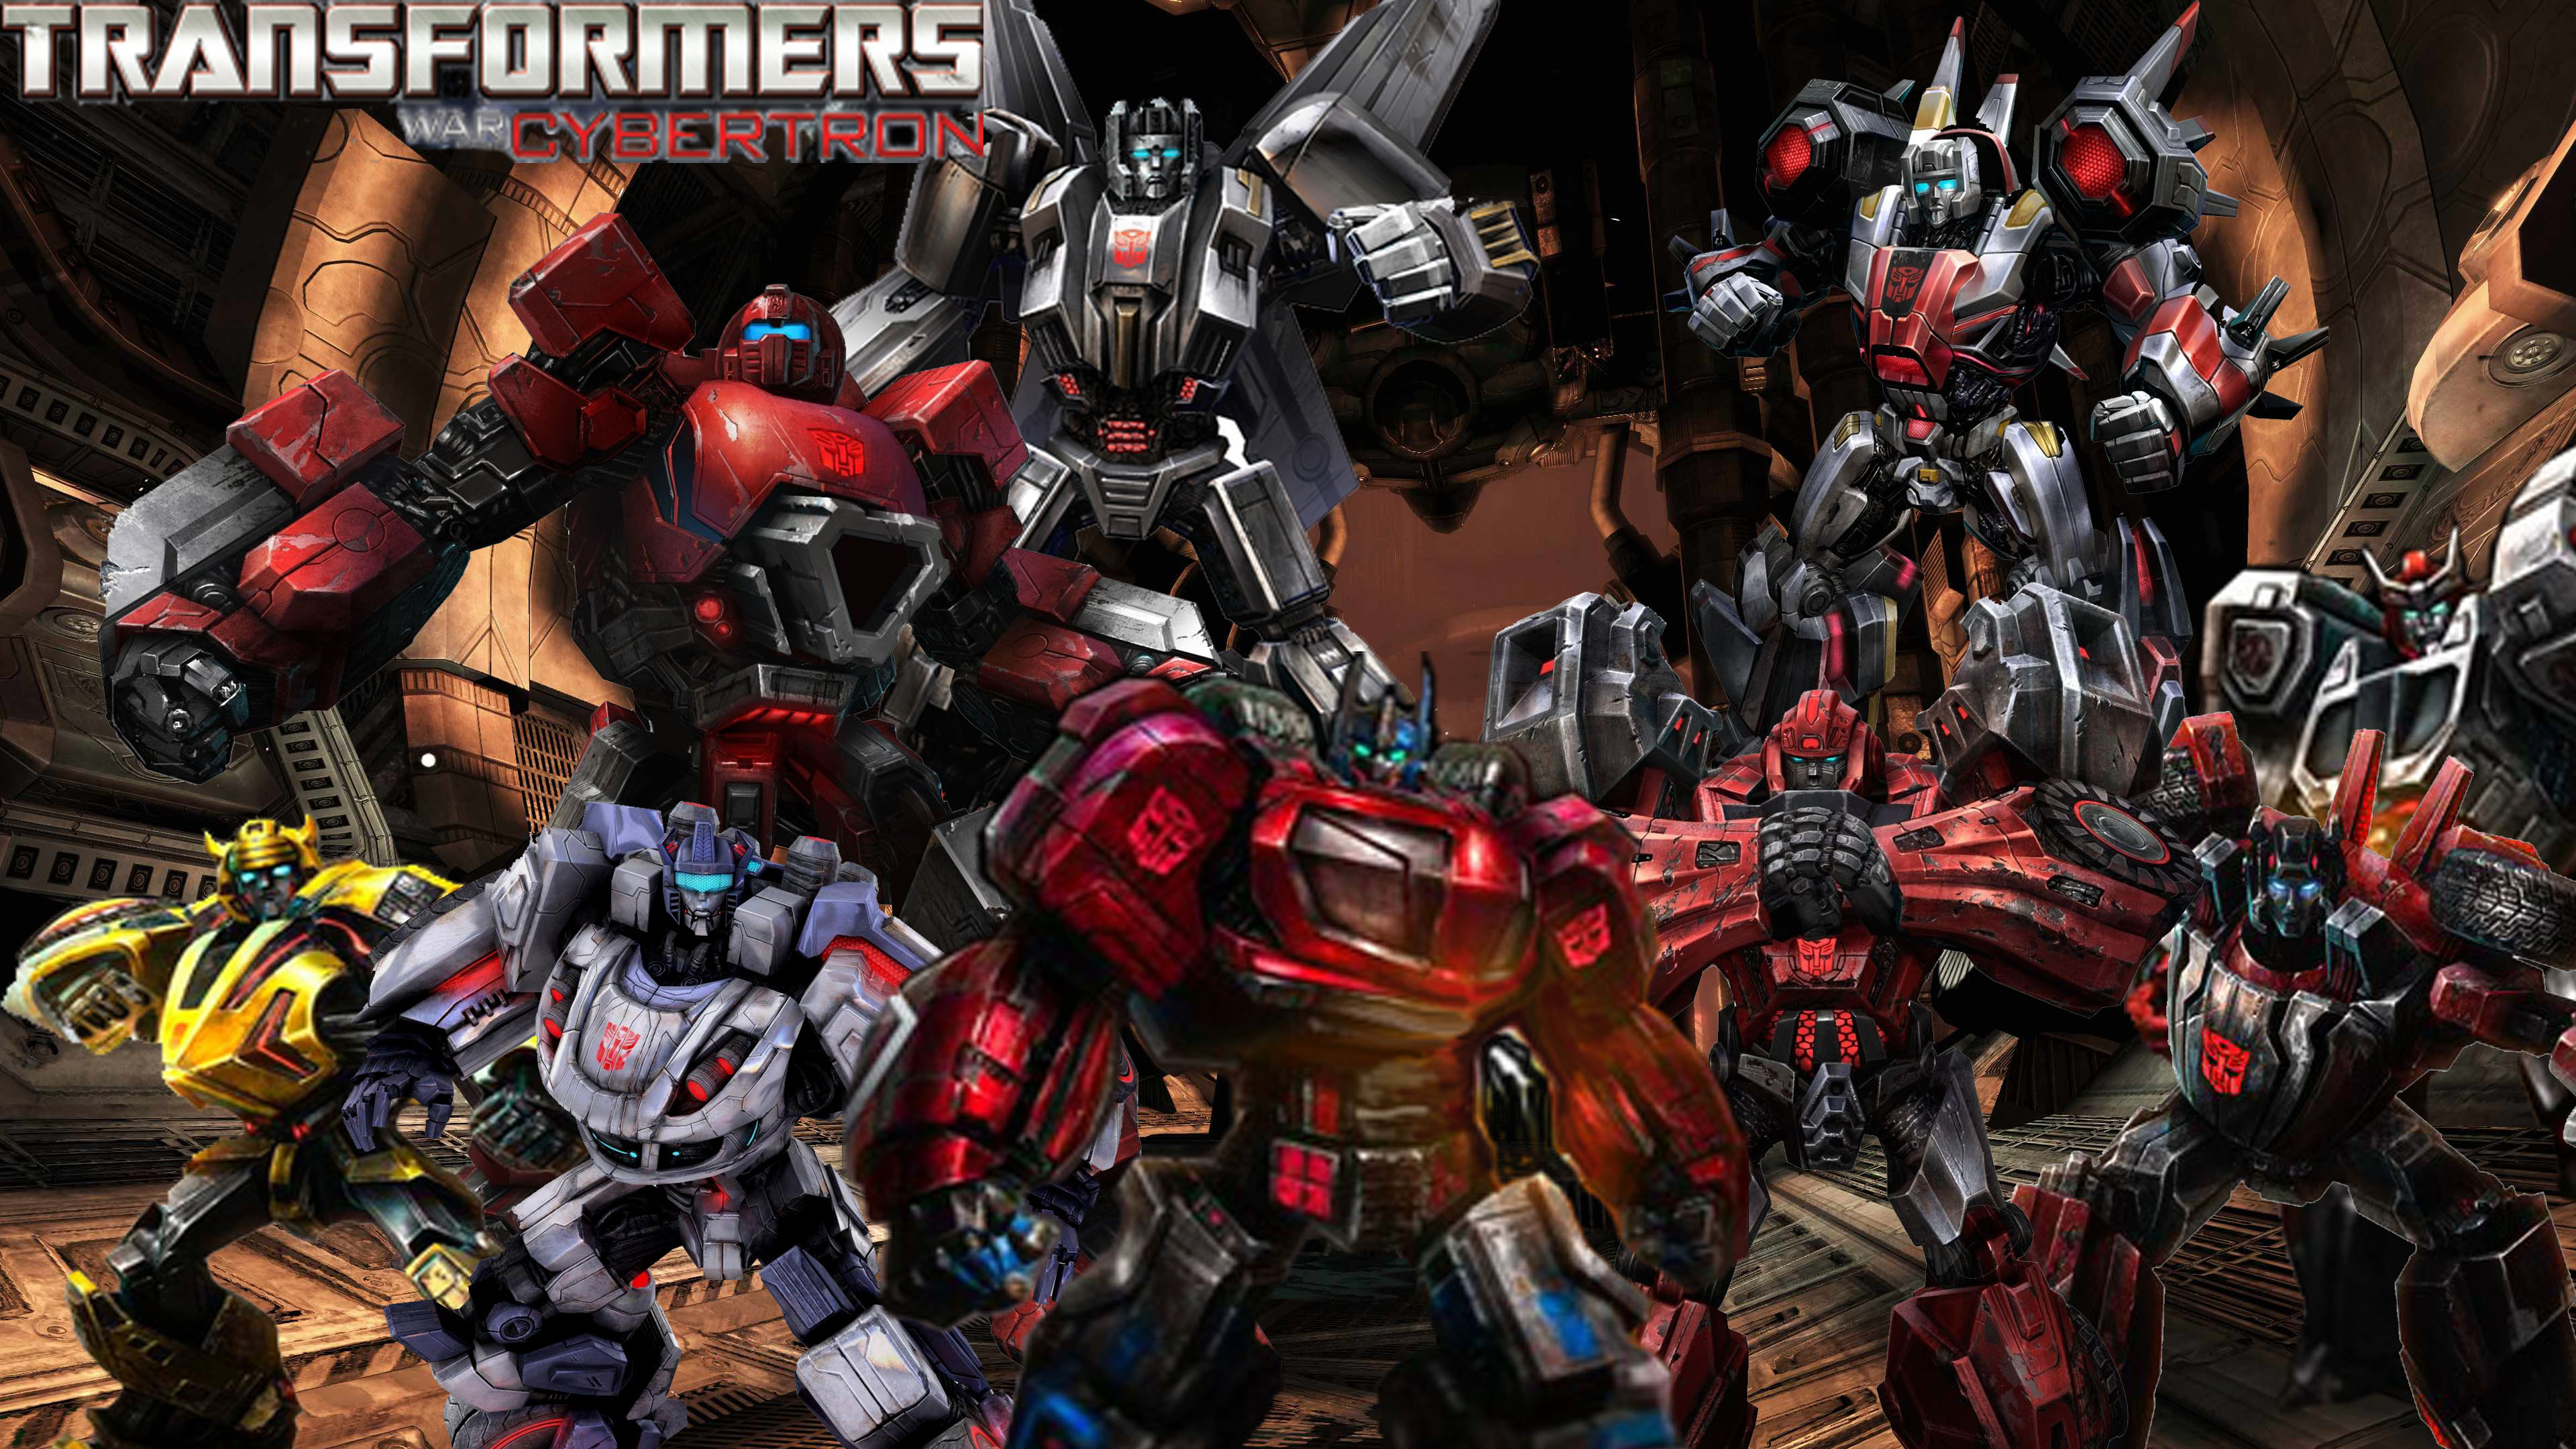 transformers war for cybertron | Branded in the 80s